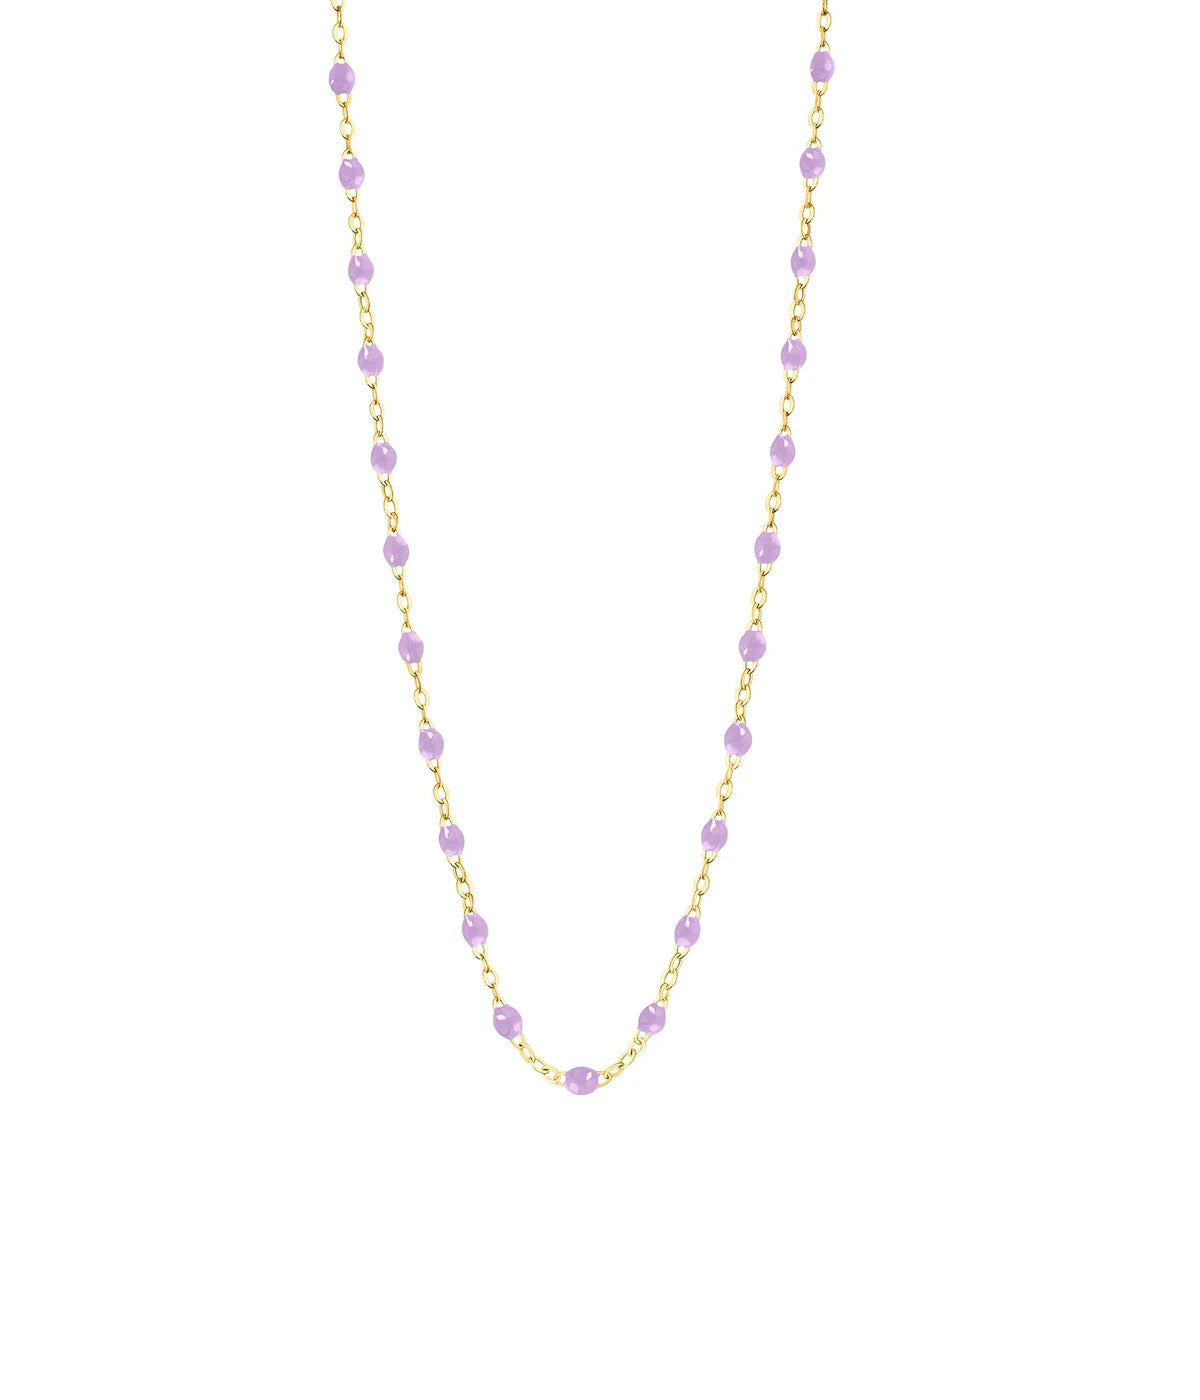 Classic Gigi 42cm Necklace in 18K Yellow Gold & Lilac